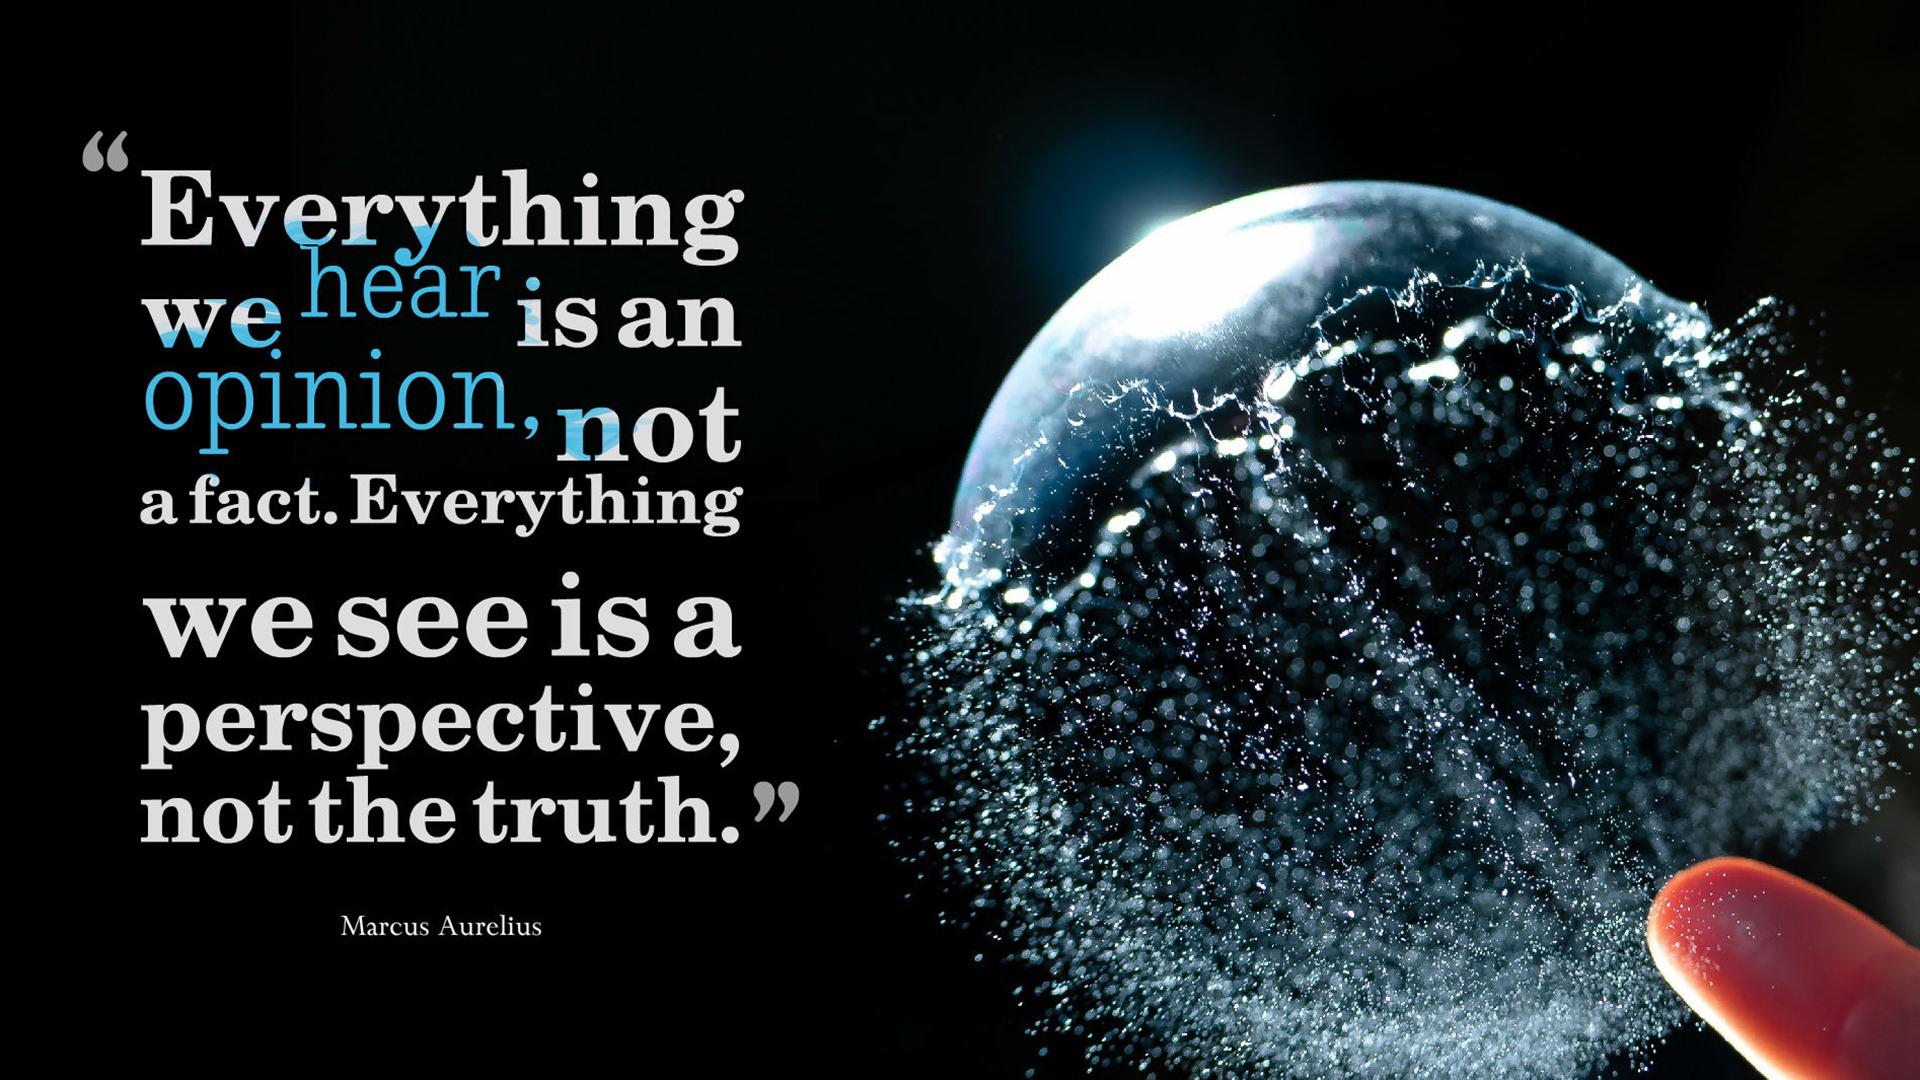 Truth Or Fact Quotes >> HD Wallpaper, get it now!